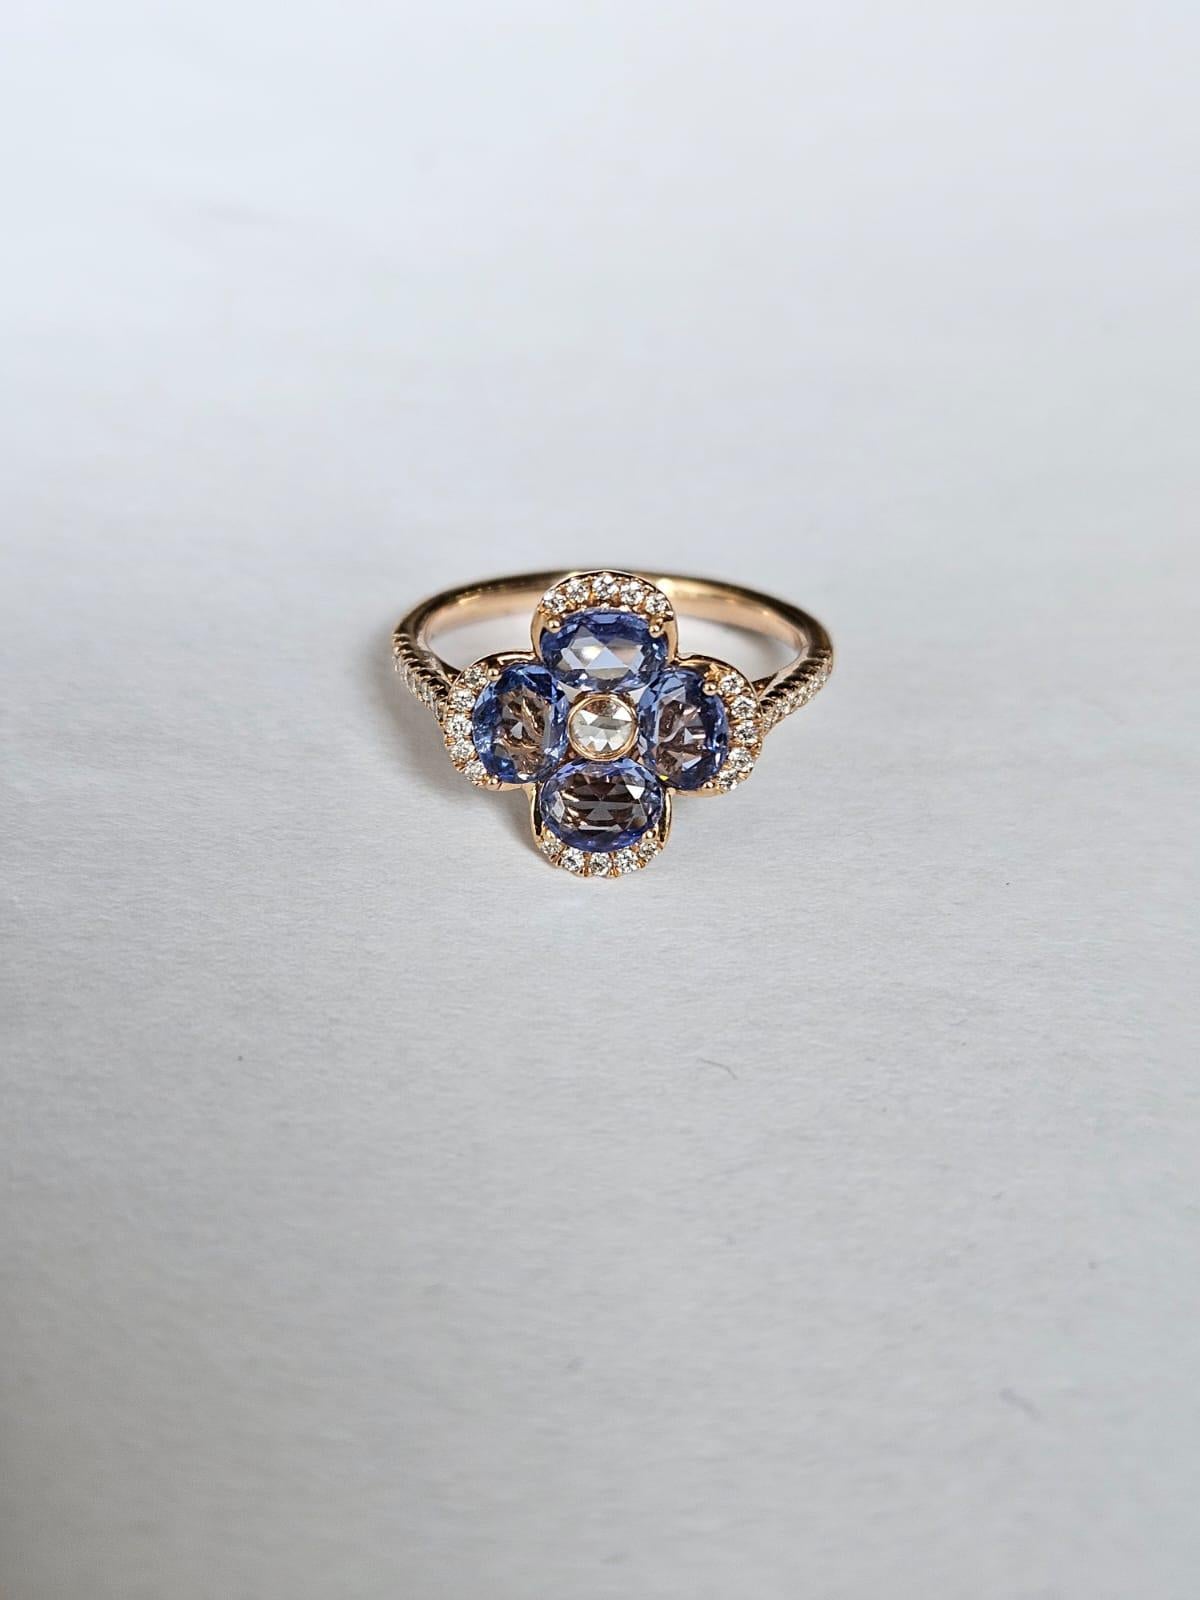 Women's or Men's Set in 18K Gold, 1.62 carats, Blue Sapphire Rose Cuts & Diamonds Engagement Ring For Sale